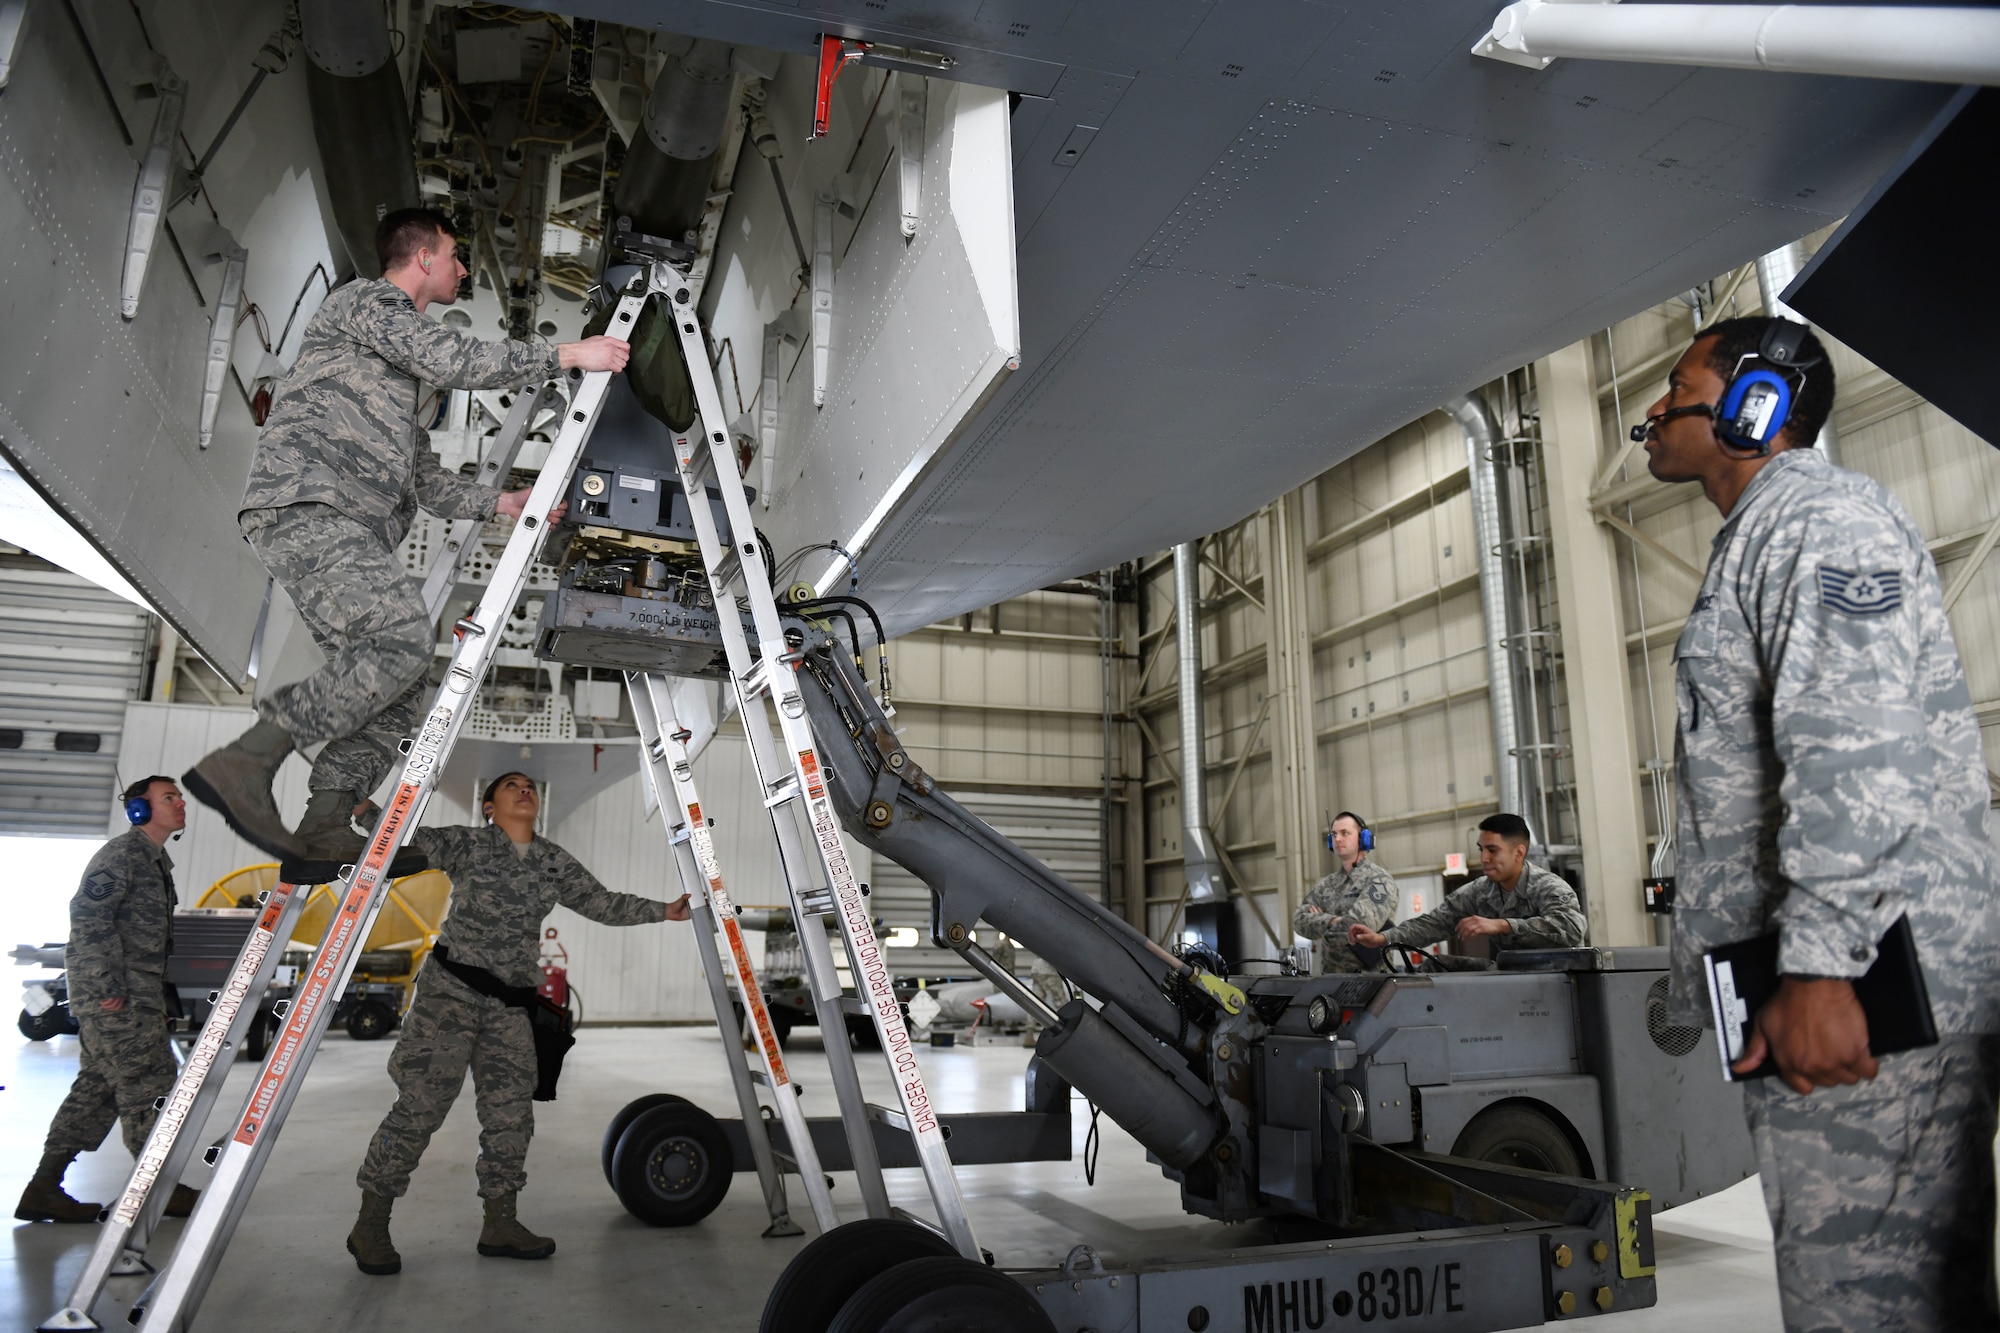 Judges for the annual weapons load competition watch as the 28th Munitions Squadron load crew install a second GBU-38 Joint Direct Attack Munition onto a simulated B-1 bomber at Ellsworth Air Force Base, S.D., Jan. 7, 2019. Participants competed to be recognized as the 28th Maintenance Group’s best load crew for 2018. (U.S. Air Force photo by Airman 1st Class Christina Bennett)